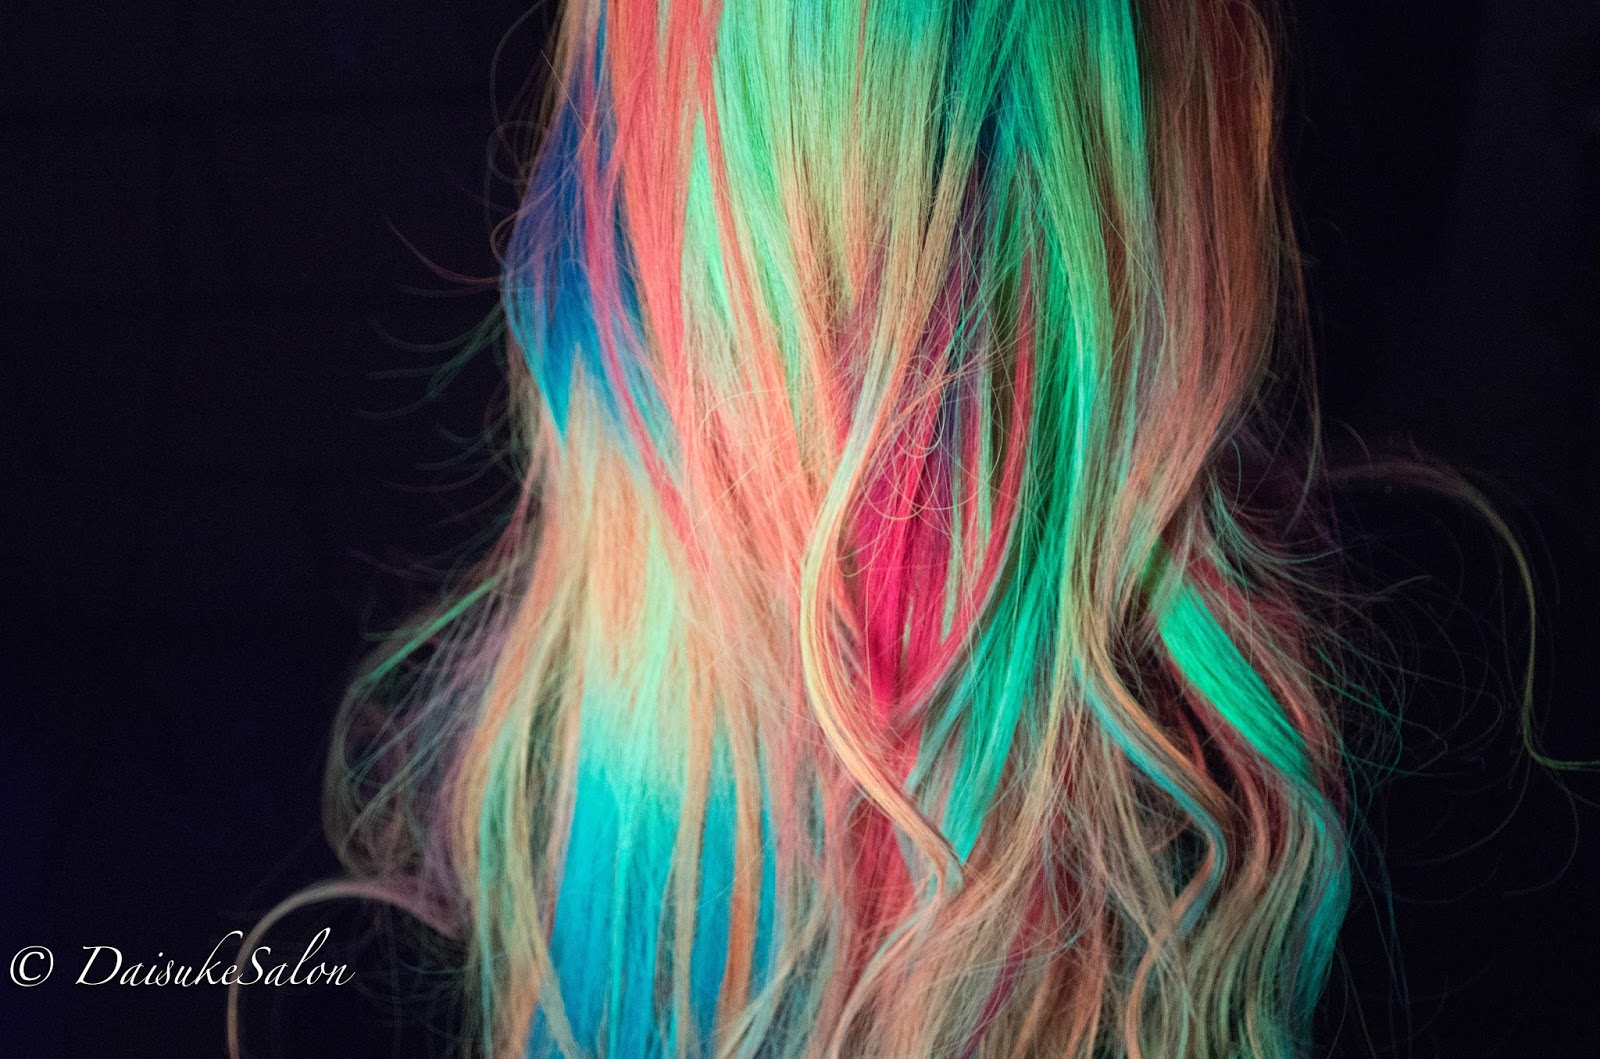 Glow-In-The-Dark Hair Is the Latest Fun Hair Trend to Light Up Your Life